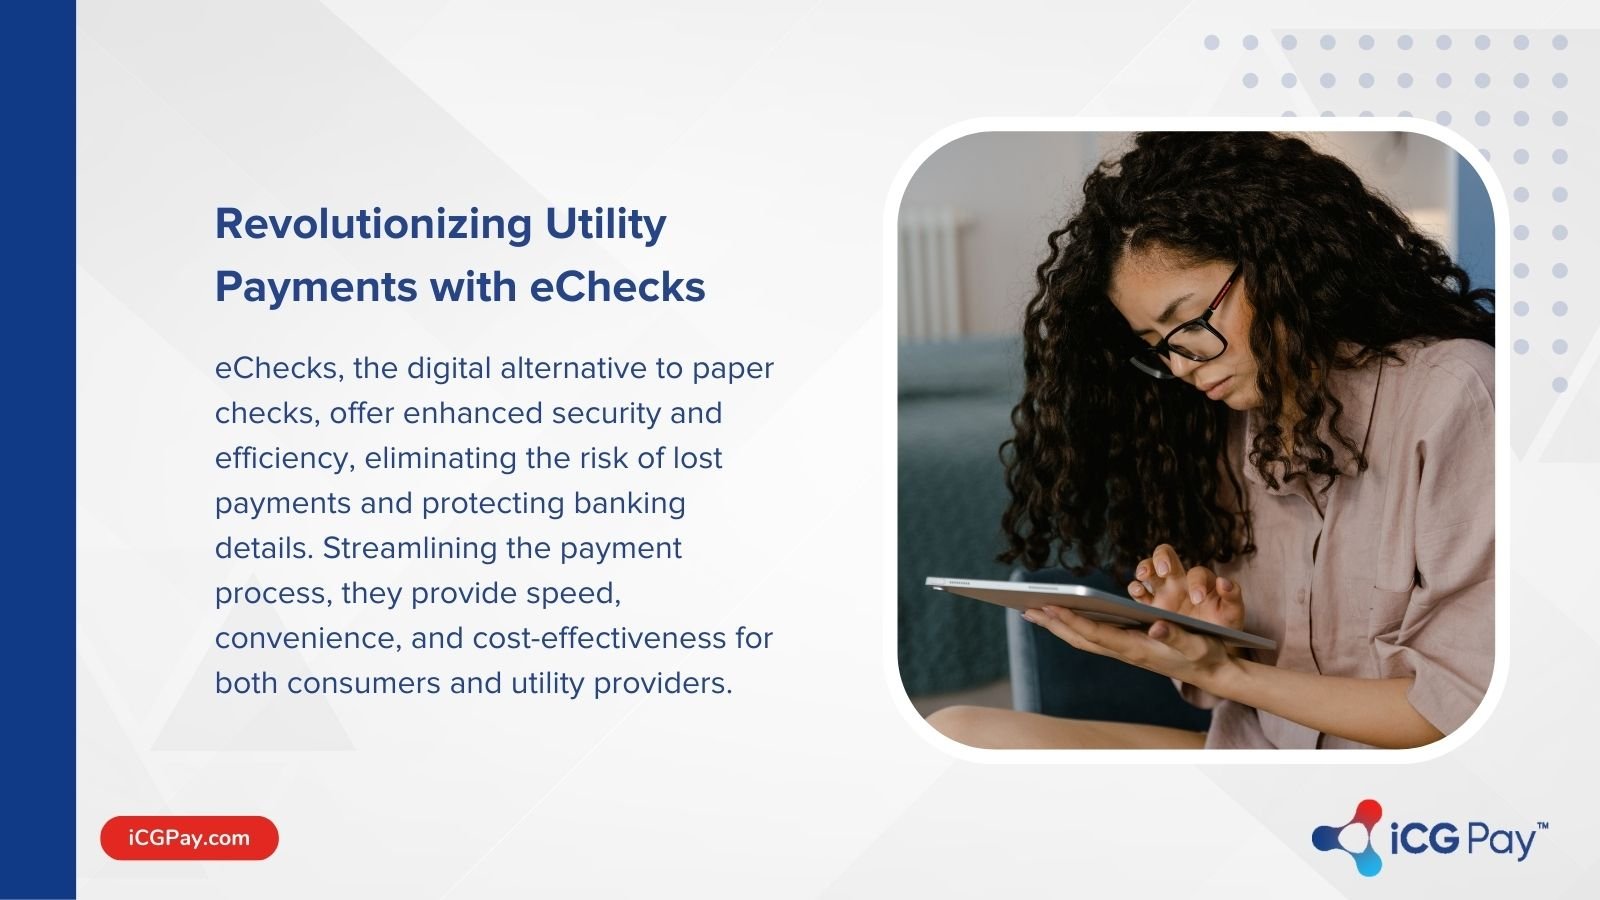 eChecks for utility payments